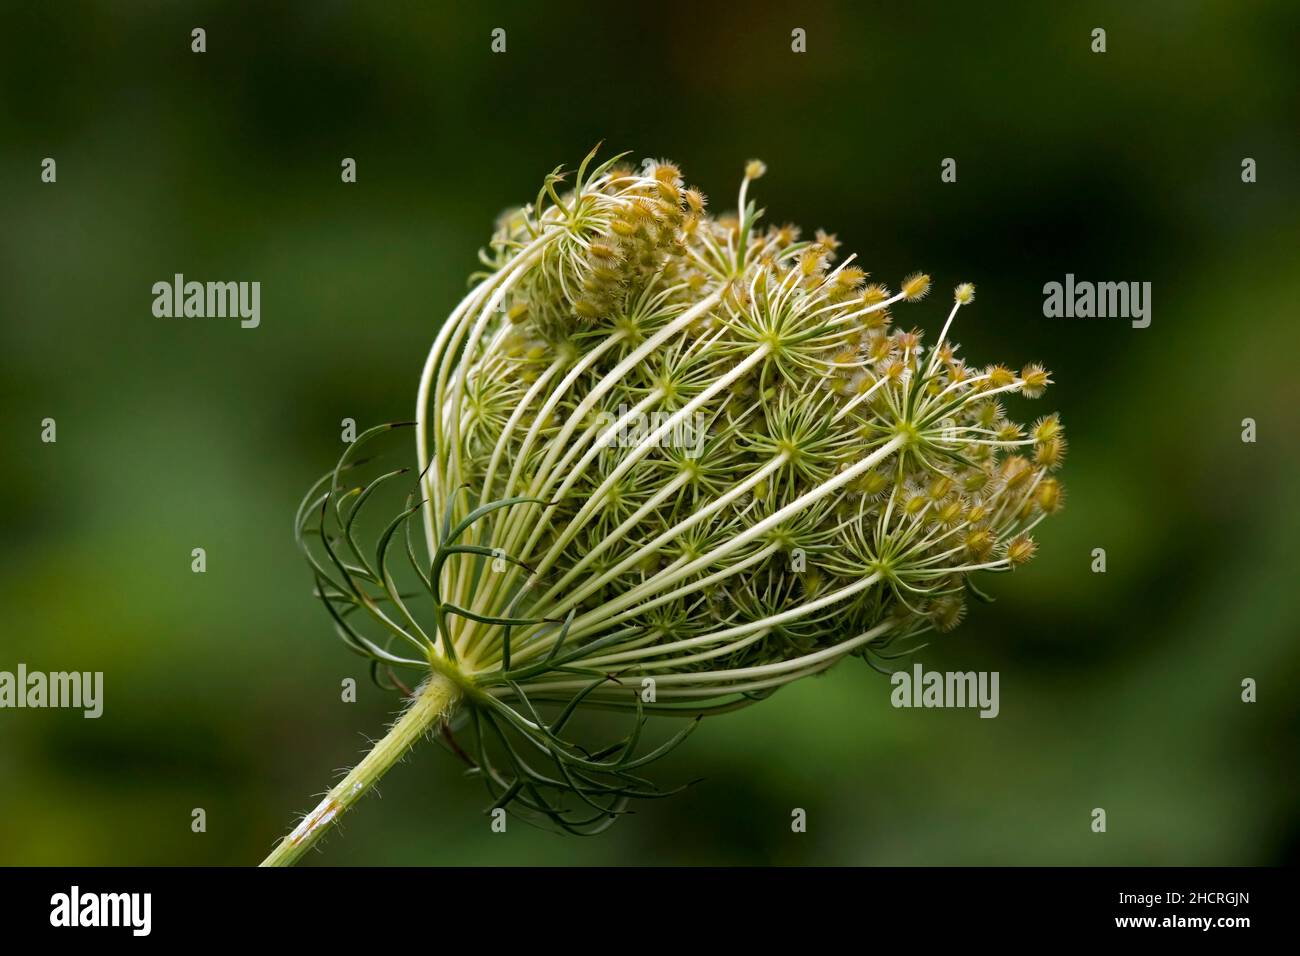 Queen Anne's Lace or Wild Carrot seed heads form a tight cluster and that often breaks in the wind to distribute the seeds. Stock Photo